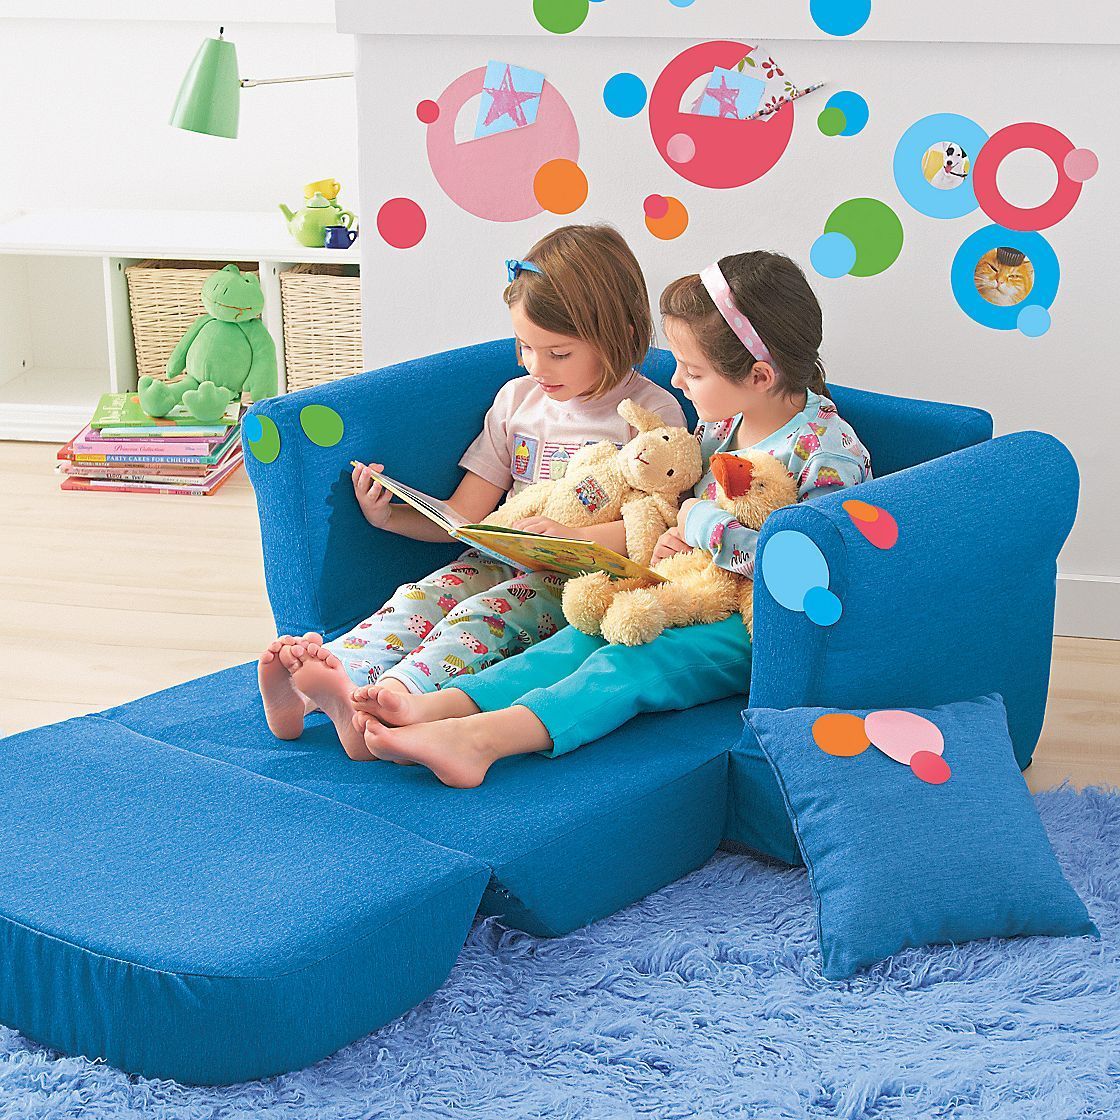 Sites Tcs Site | Kids Sofa, Kids Playroom, Kid Room Decor With Children's Sofa Beds (View 13 of 20)